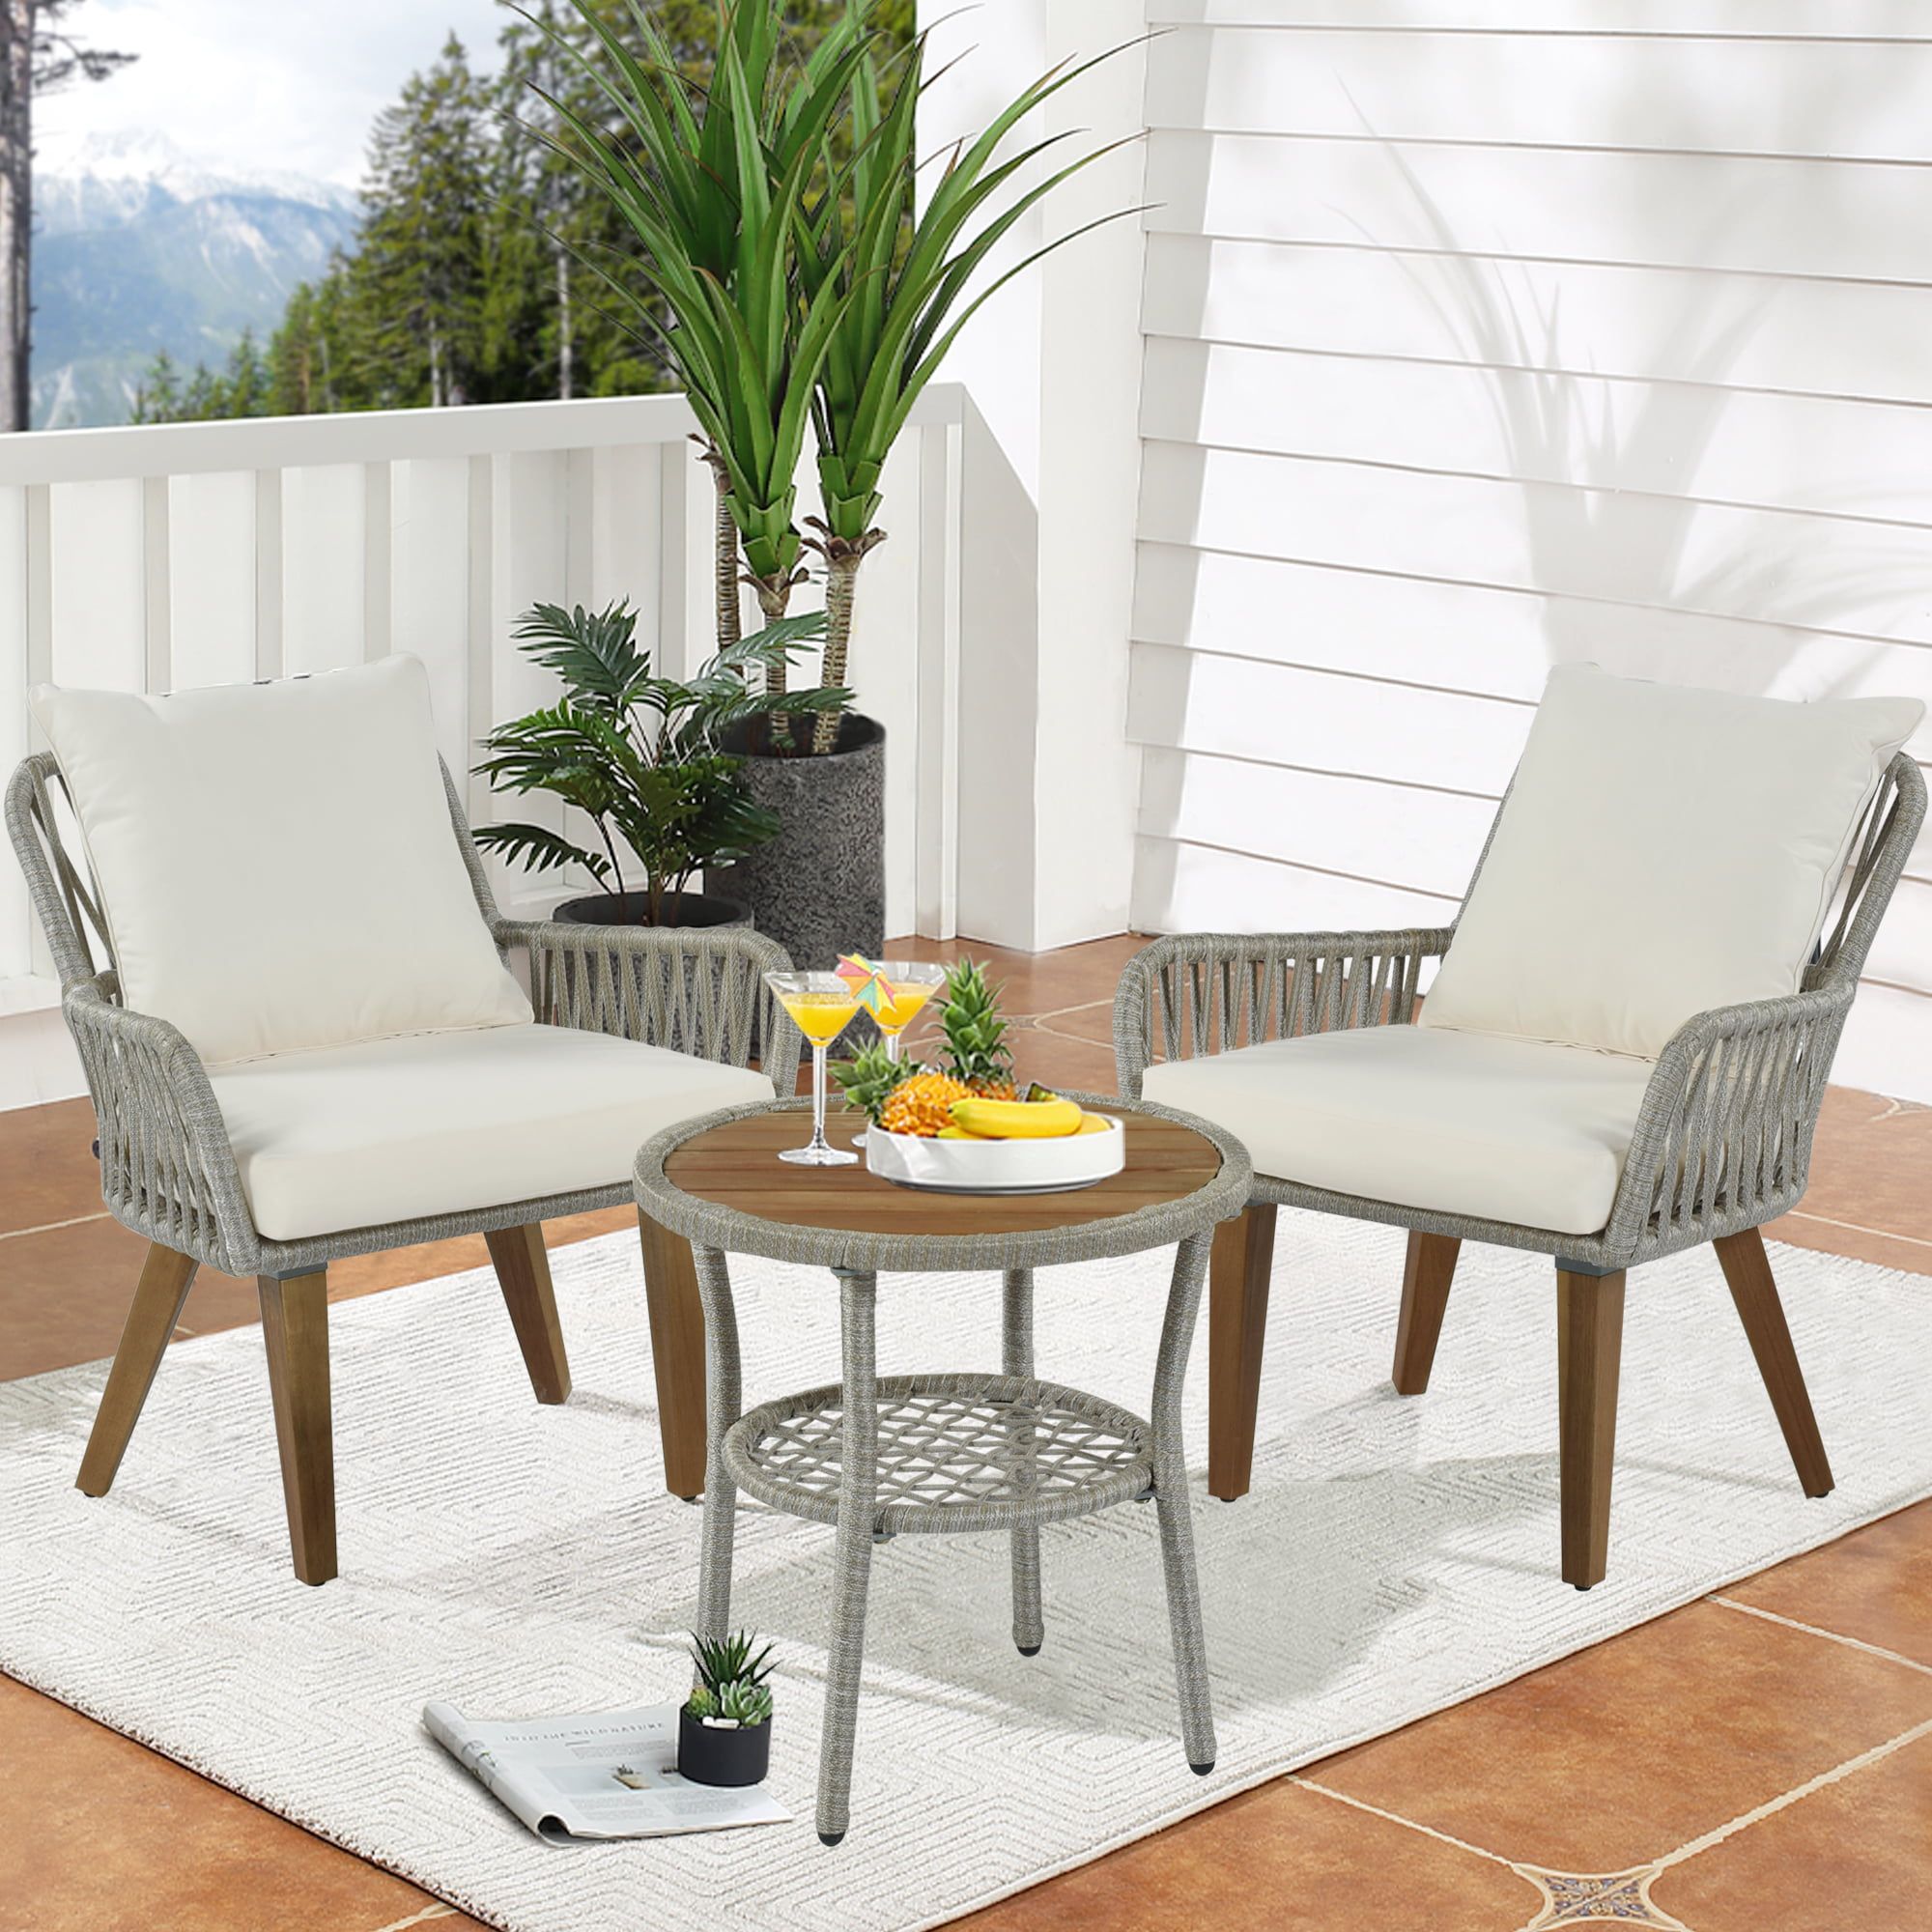 3 Pcs Bistro Set, Outdoor Patio Porch Furniture India | Ubuy Inside Patio Furniture Wicker Outdoor Bistro Set (View 15 of 15)